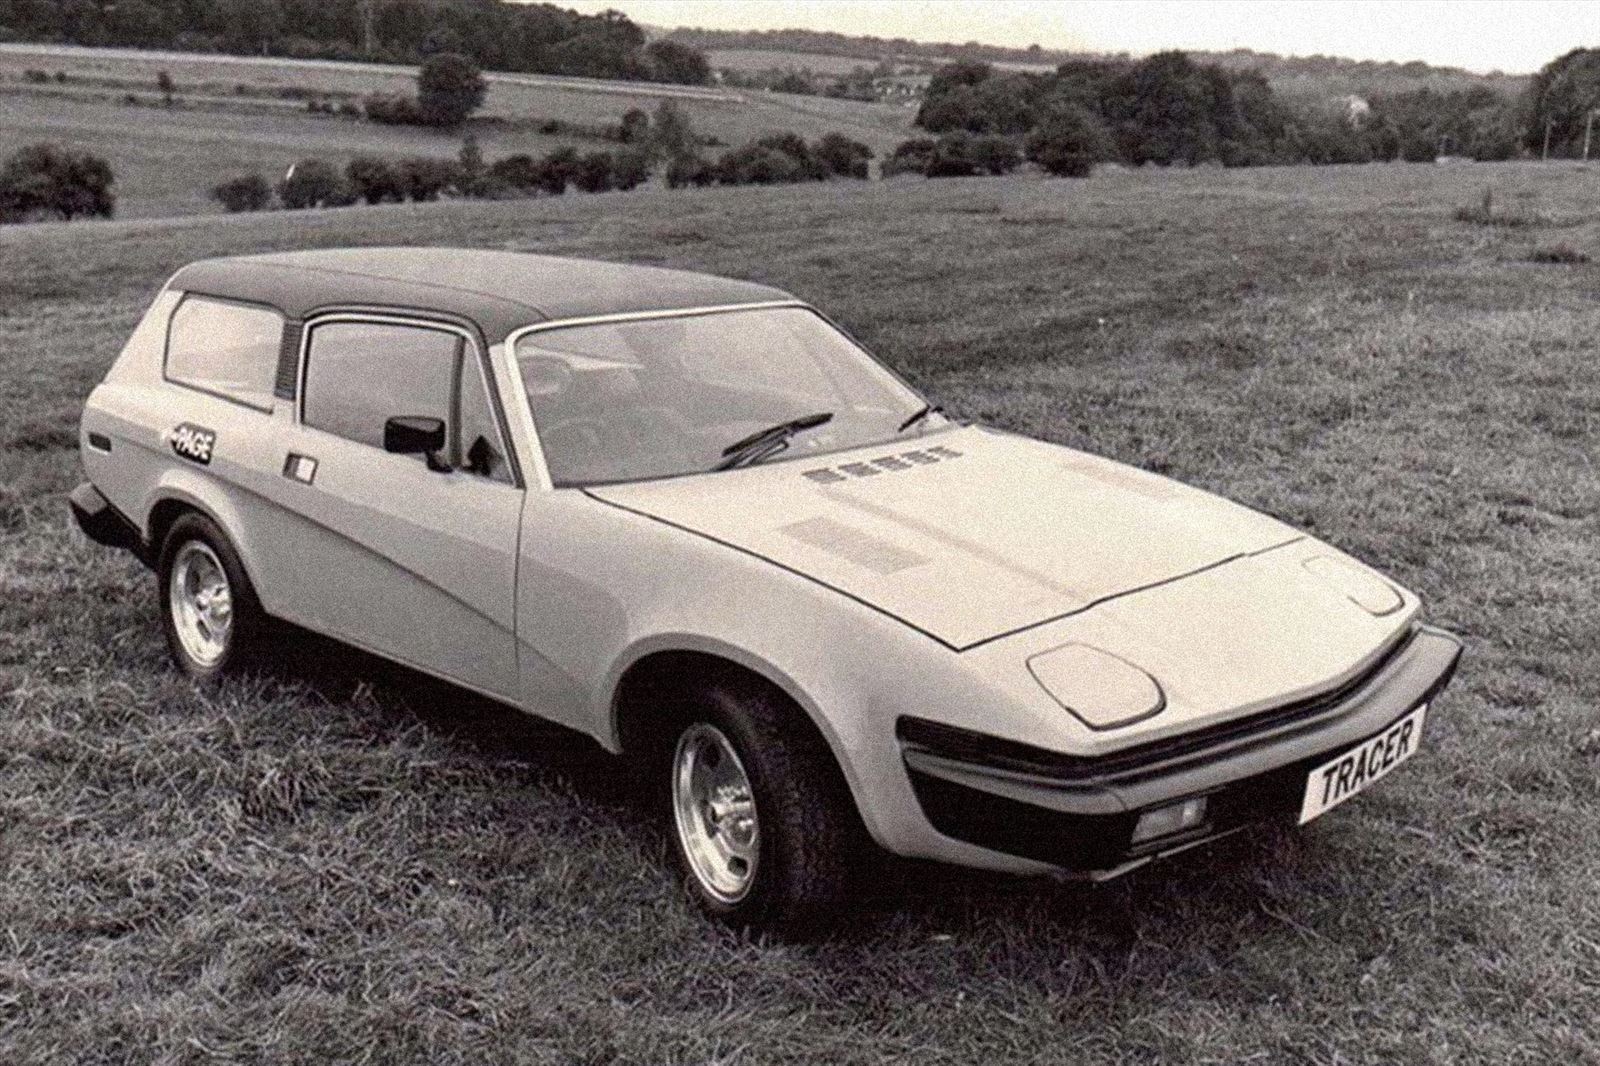 Crayford Engineering TR7 Tracer: the sporting Triumph that failed to make the grade